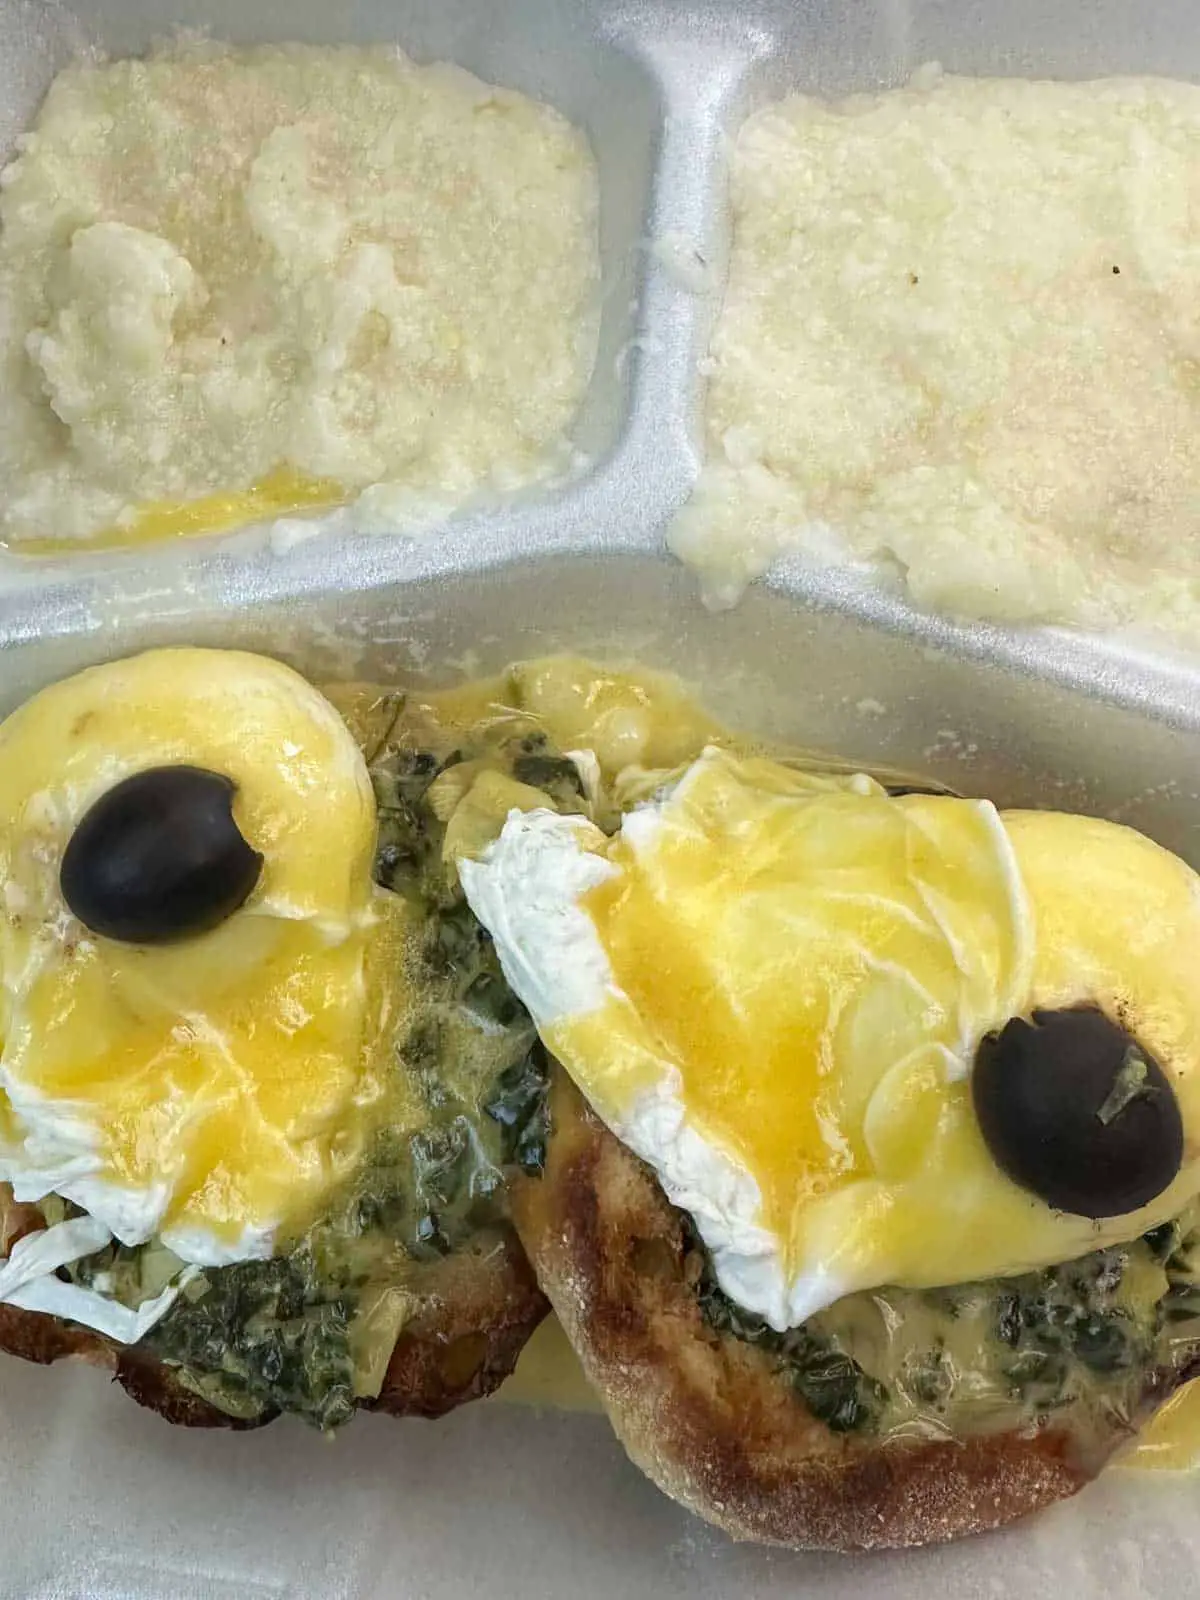 2 each Eggs Sardou which is poached egg on top of creamed spinach, artichoke, and English muffin and topped with Hollandaise sauce and a black olive, with grits in the background.